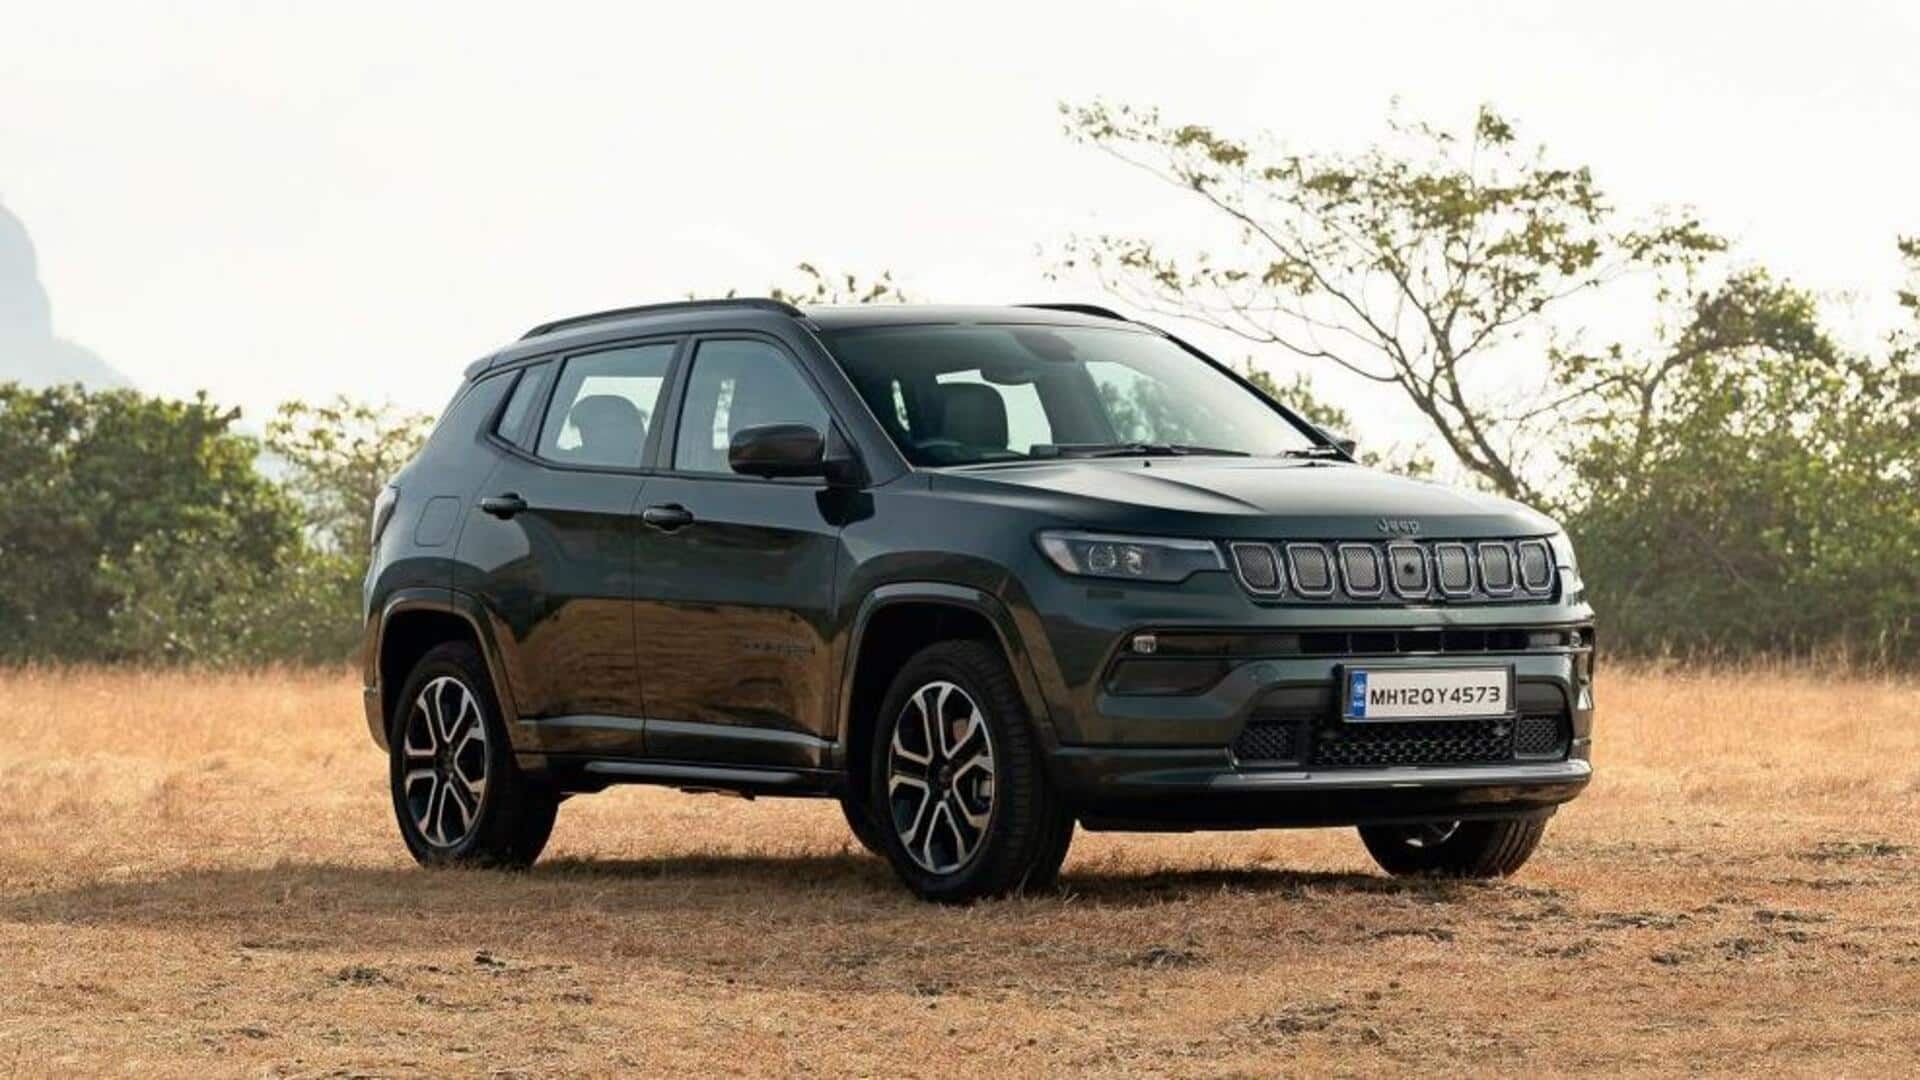 With facelift, Jeep makes Compass SUV more affordable